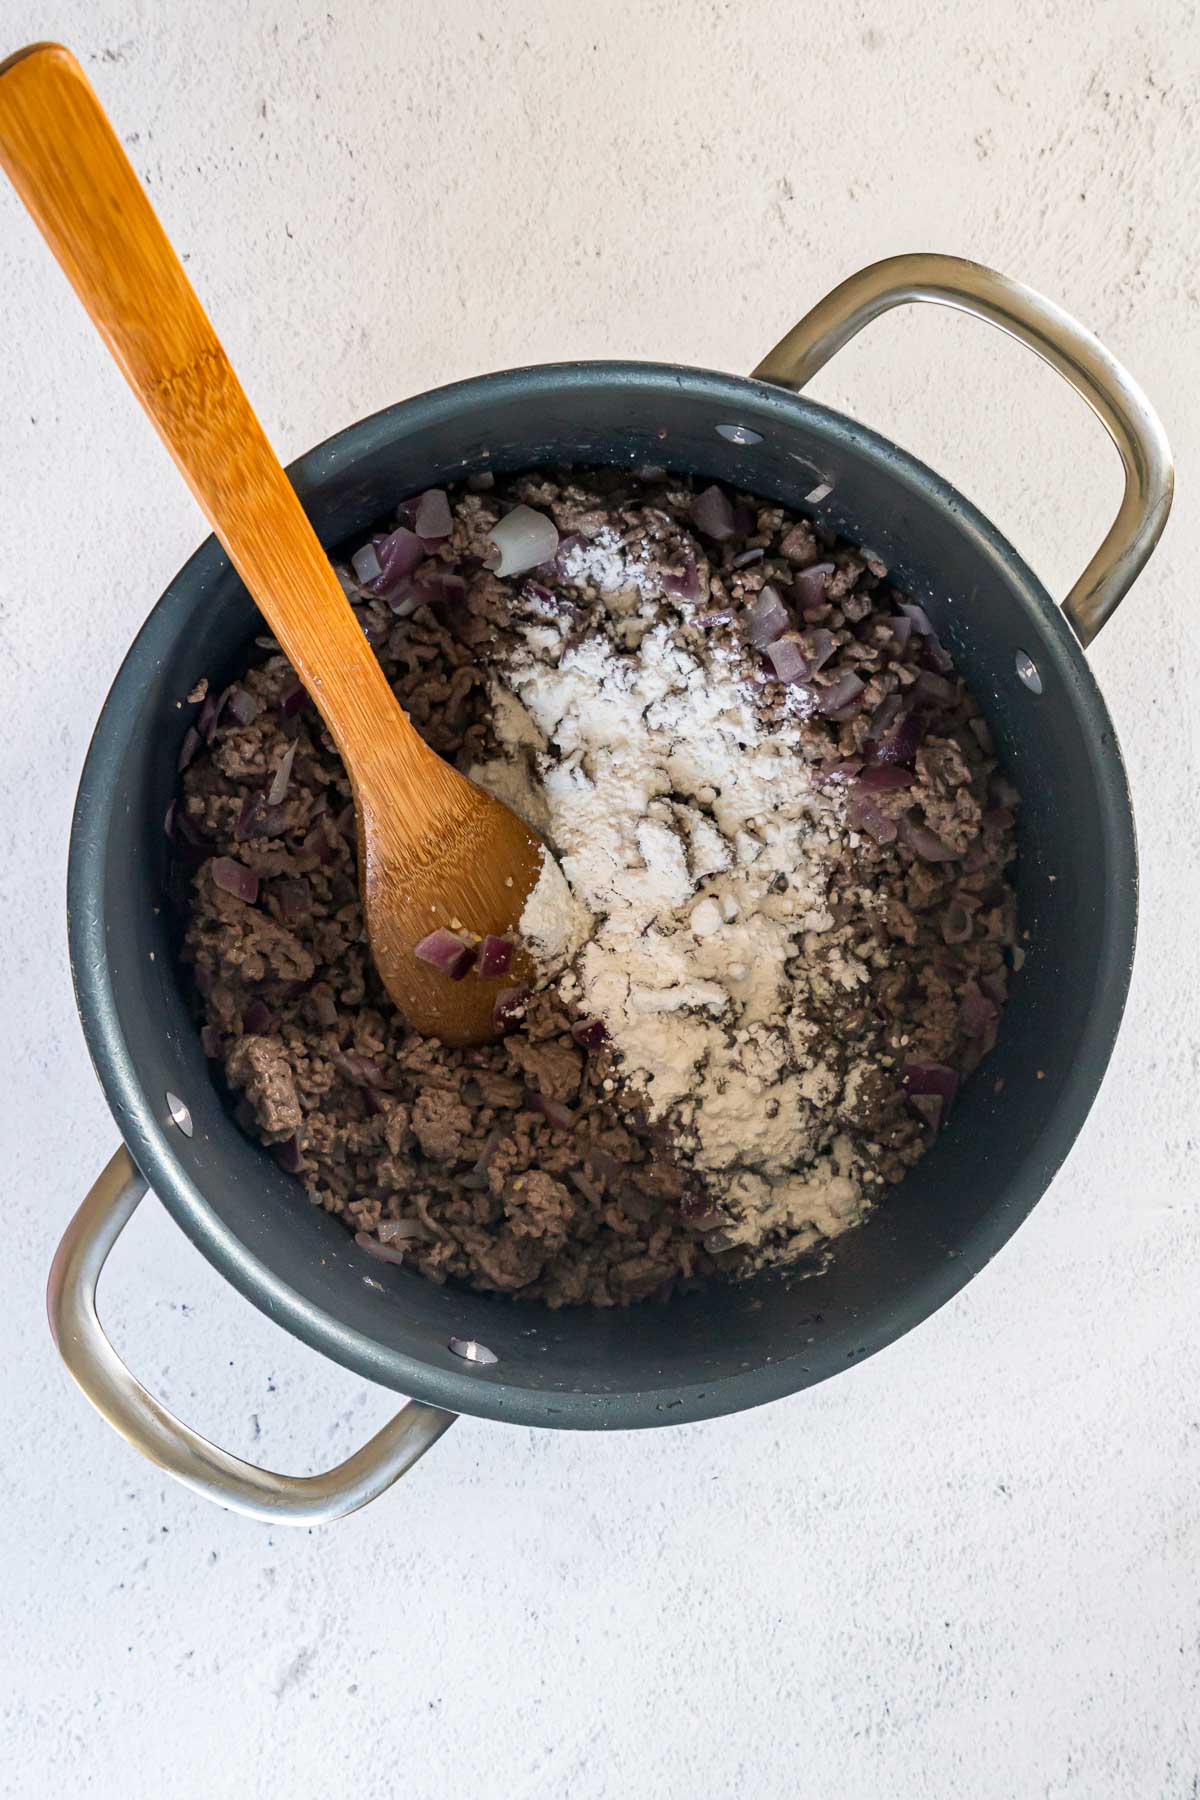 Flour sprinkled over cooked ground beef in a pot.